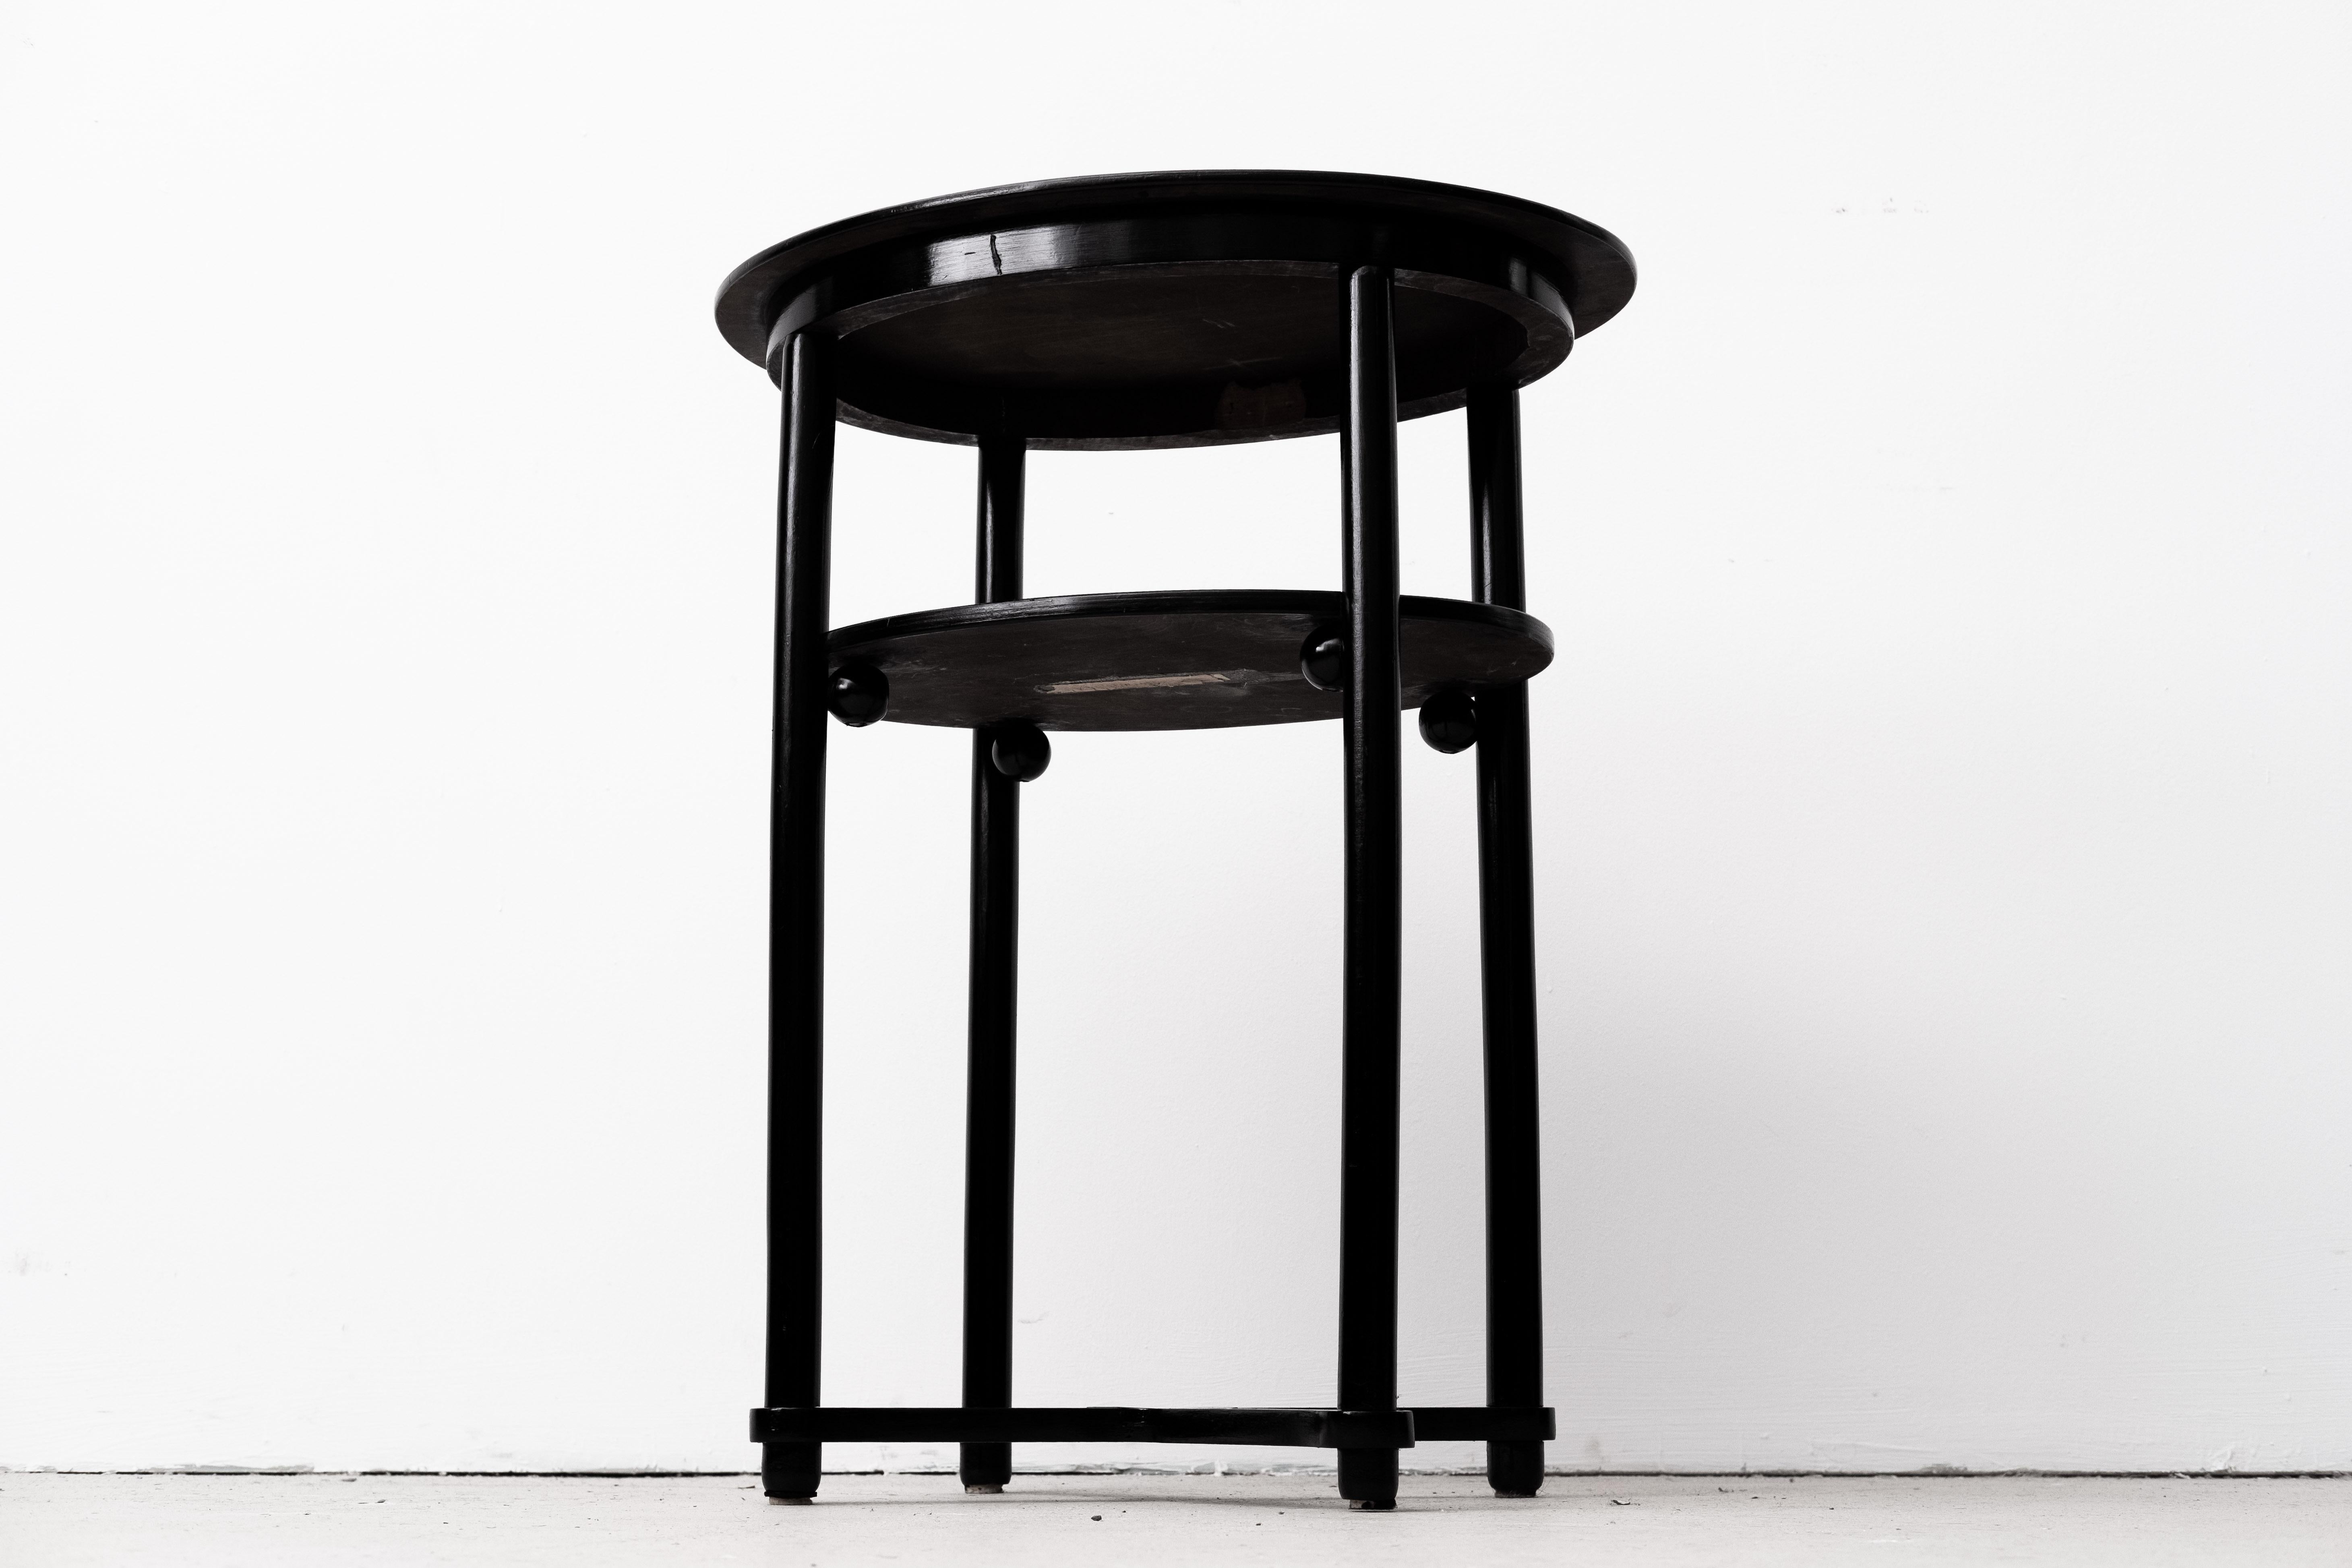 Secession Sidetable, attr. to J. Hoffmann, ex. by Fischel & Söhne (CZK, 1915) For Sale 6